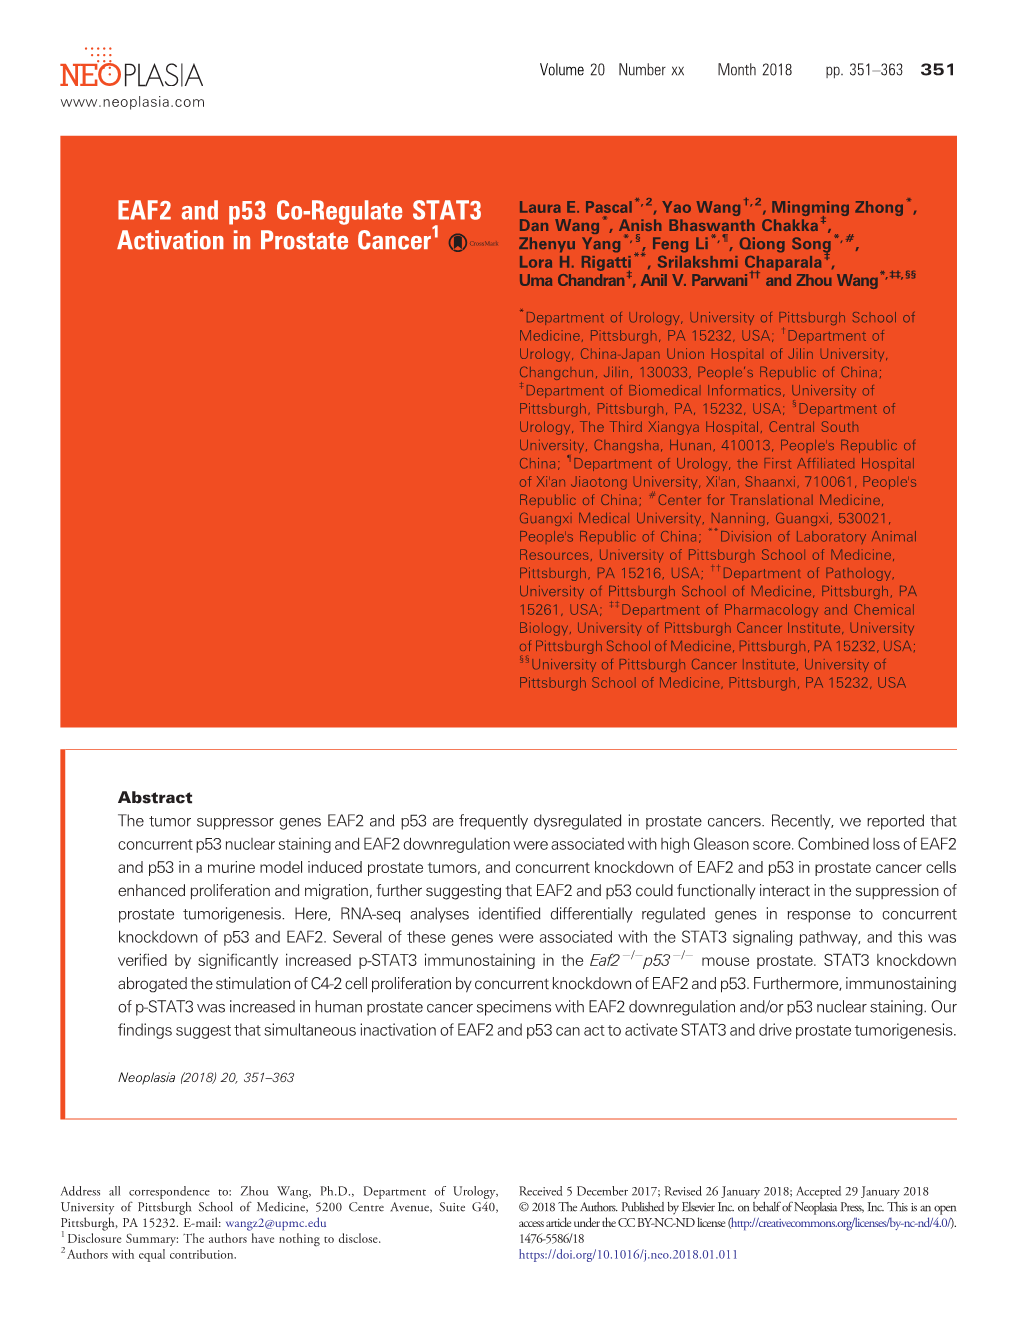 EAF2 and P53 Co-Regulate STAT3 Activation in Prostate Cancer